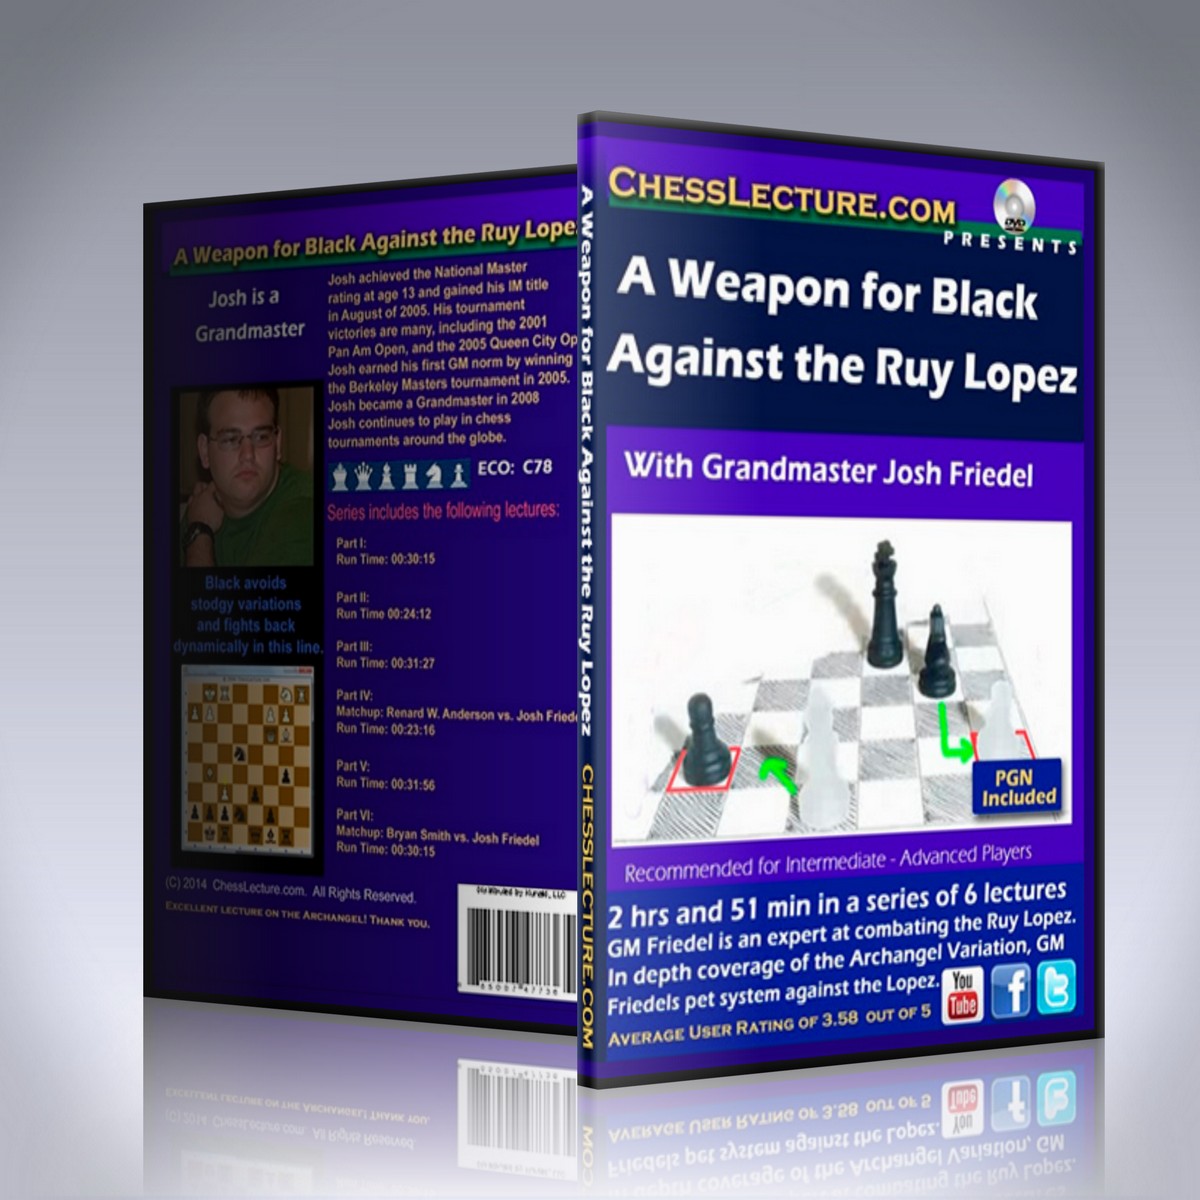 Ruy López Opening Traps: Black's Tactical Arsenal for Victory